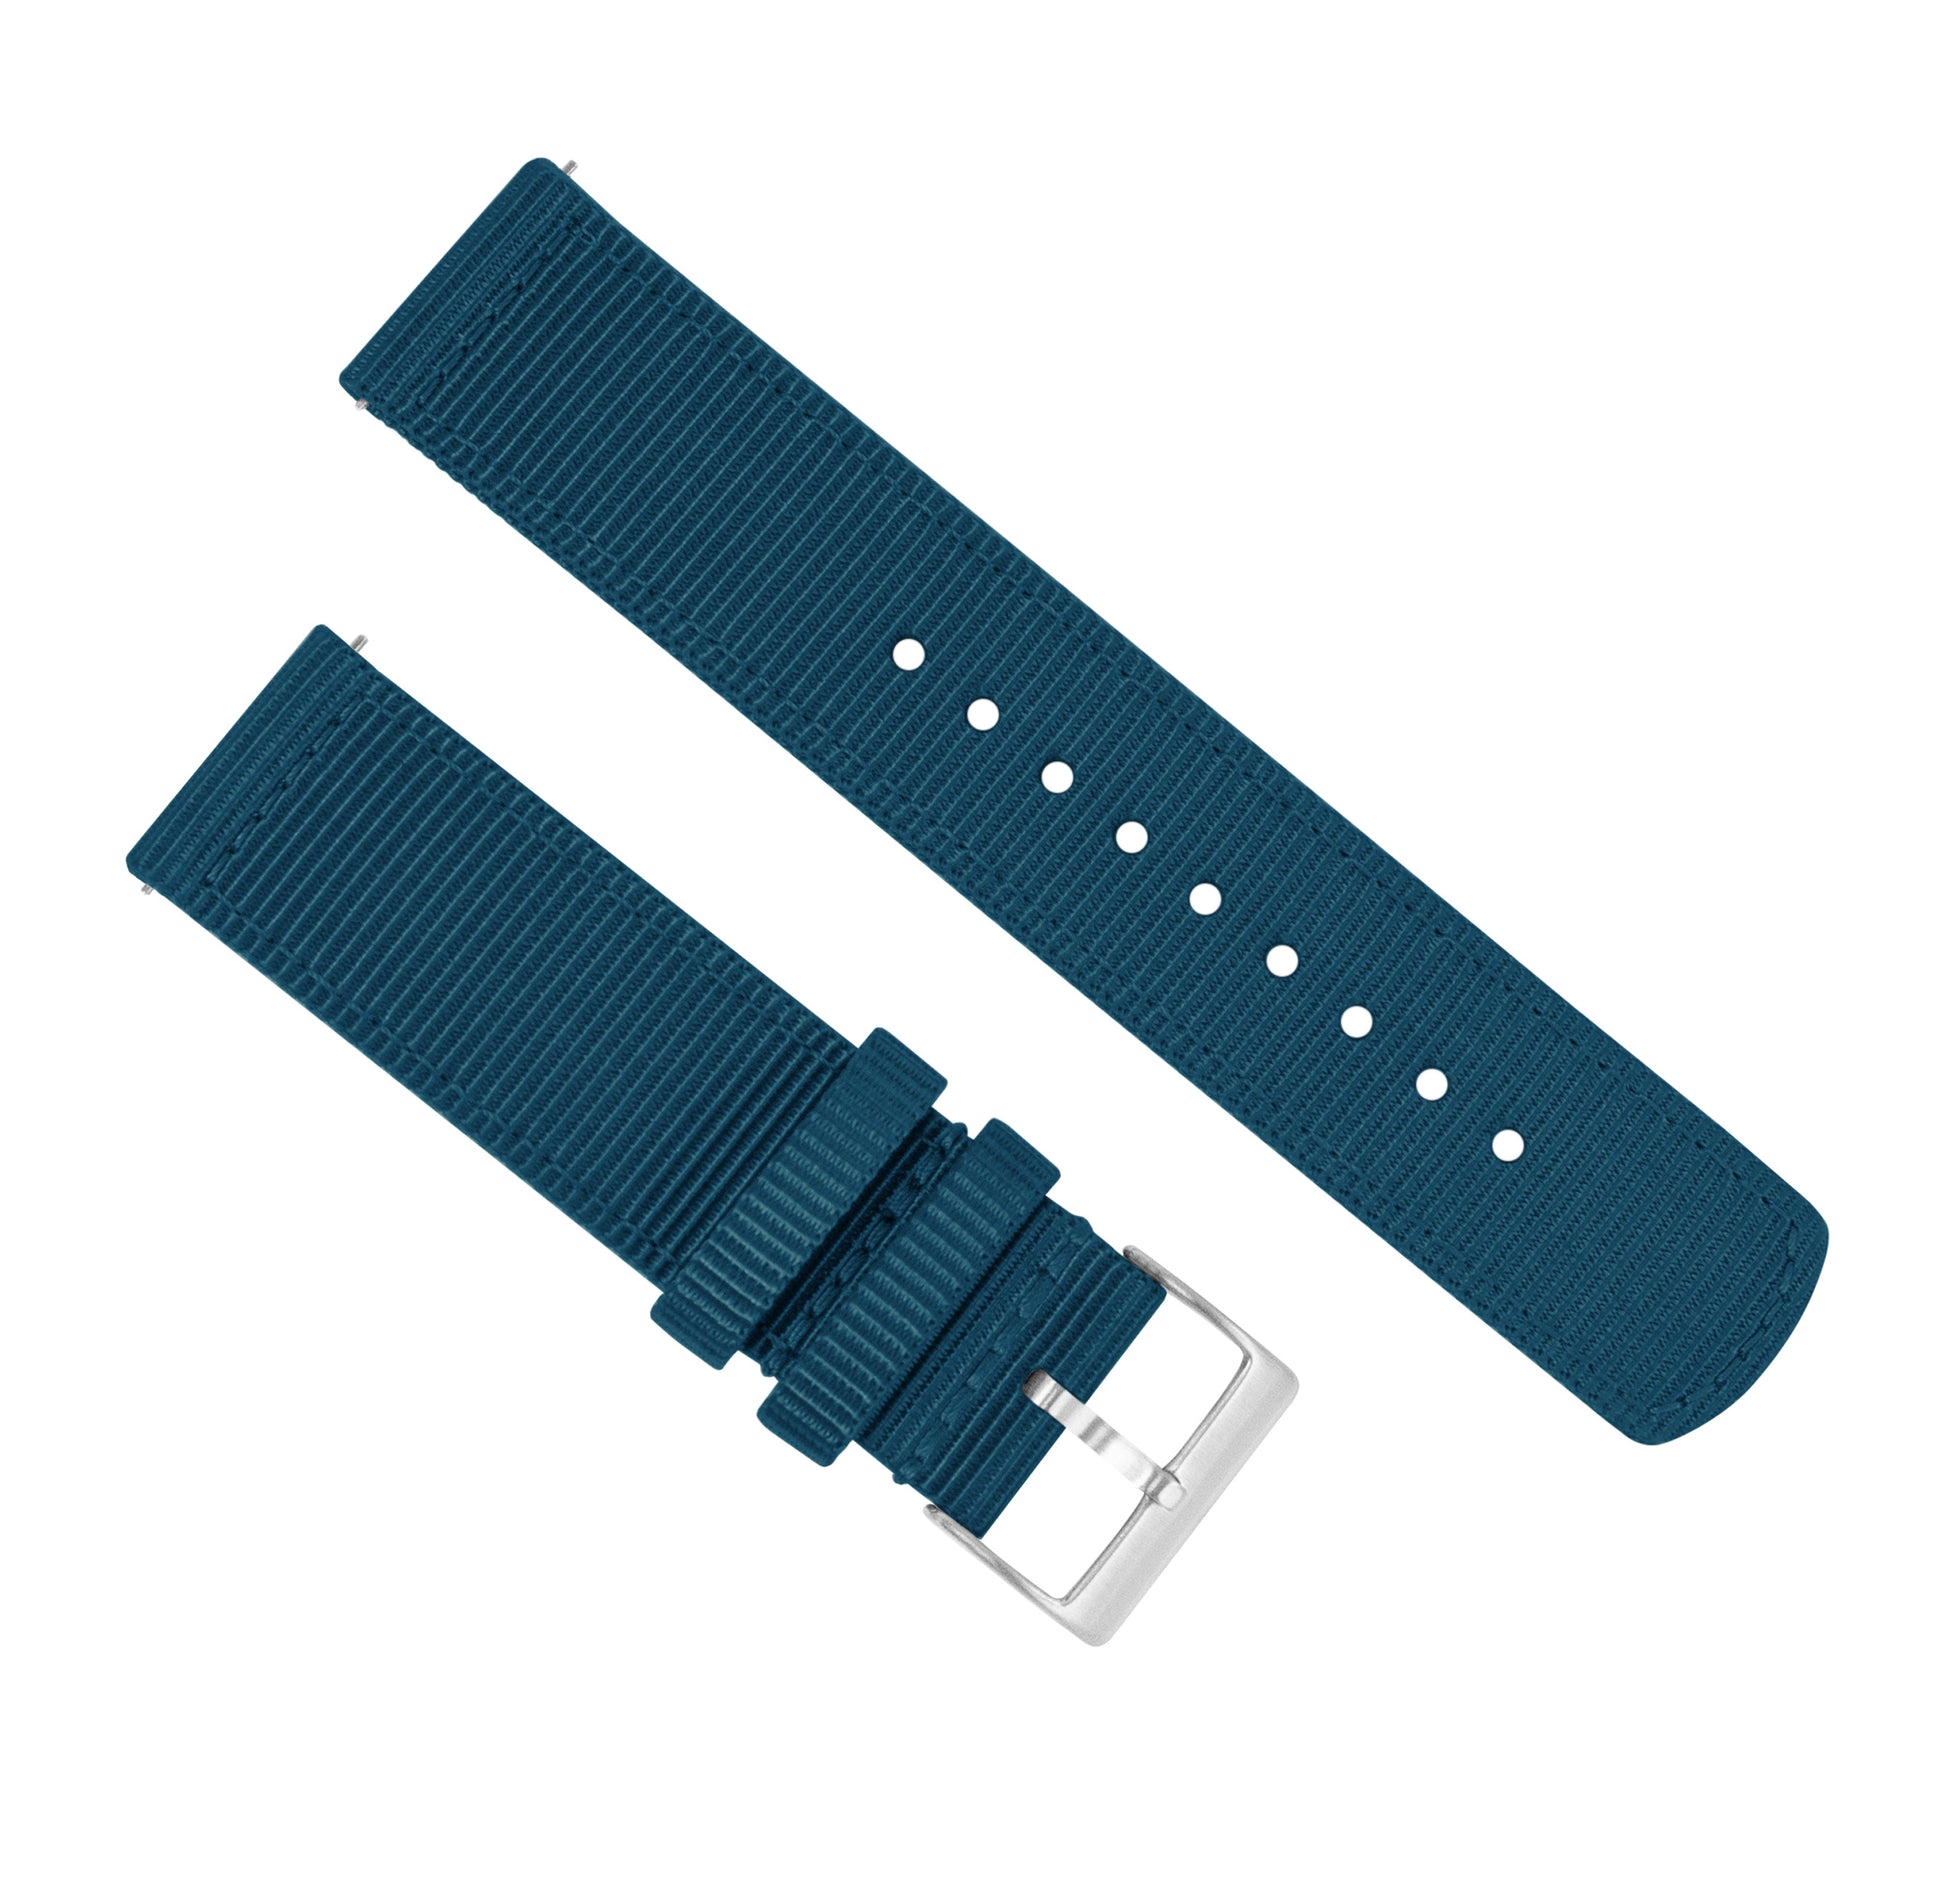 Amazfit Bip | Two-Piece NATO Style | Steel Blue - Barton Watch Bands